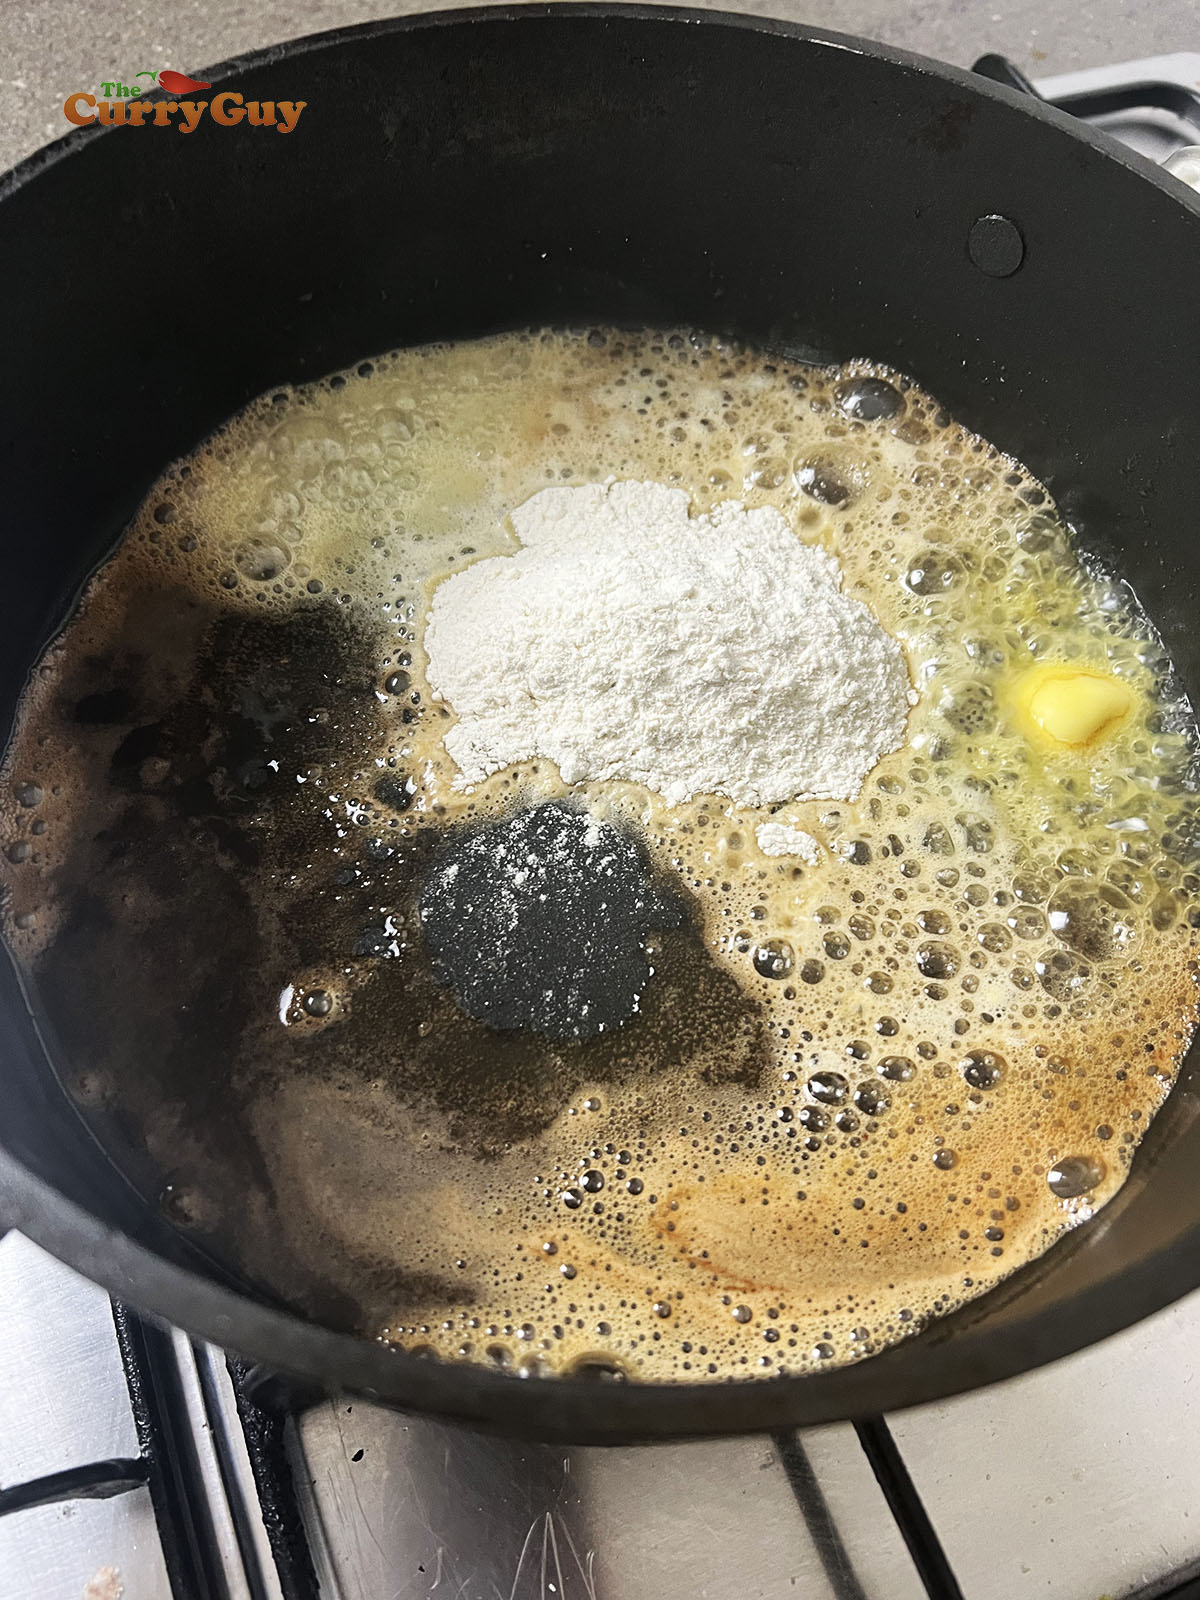 Making the roux